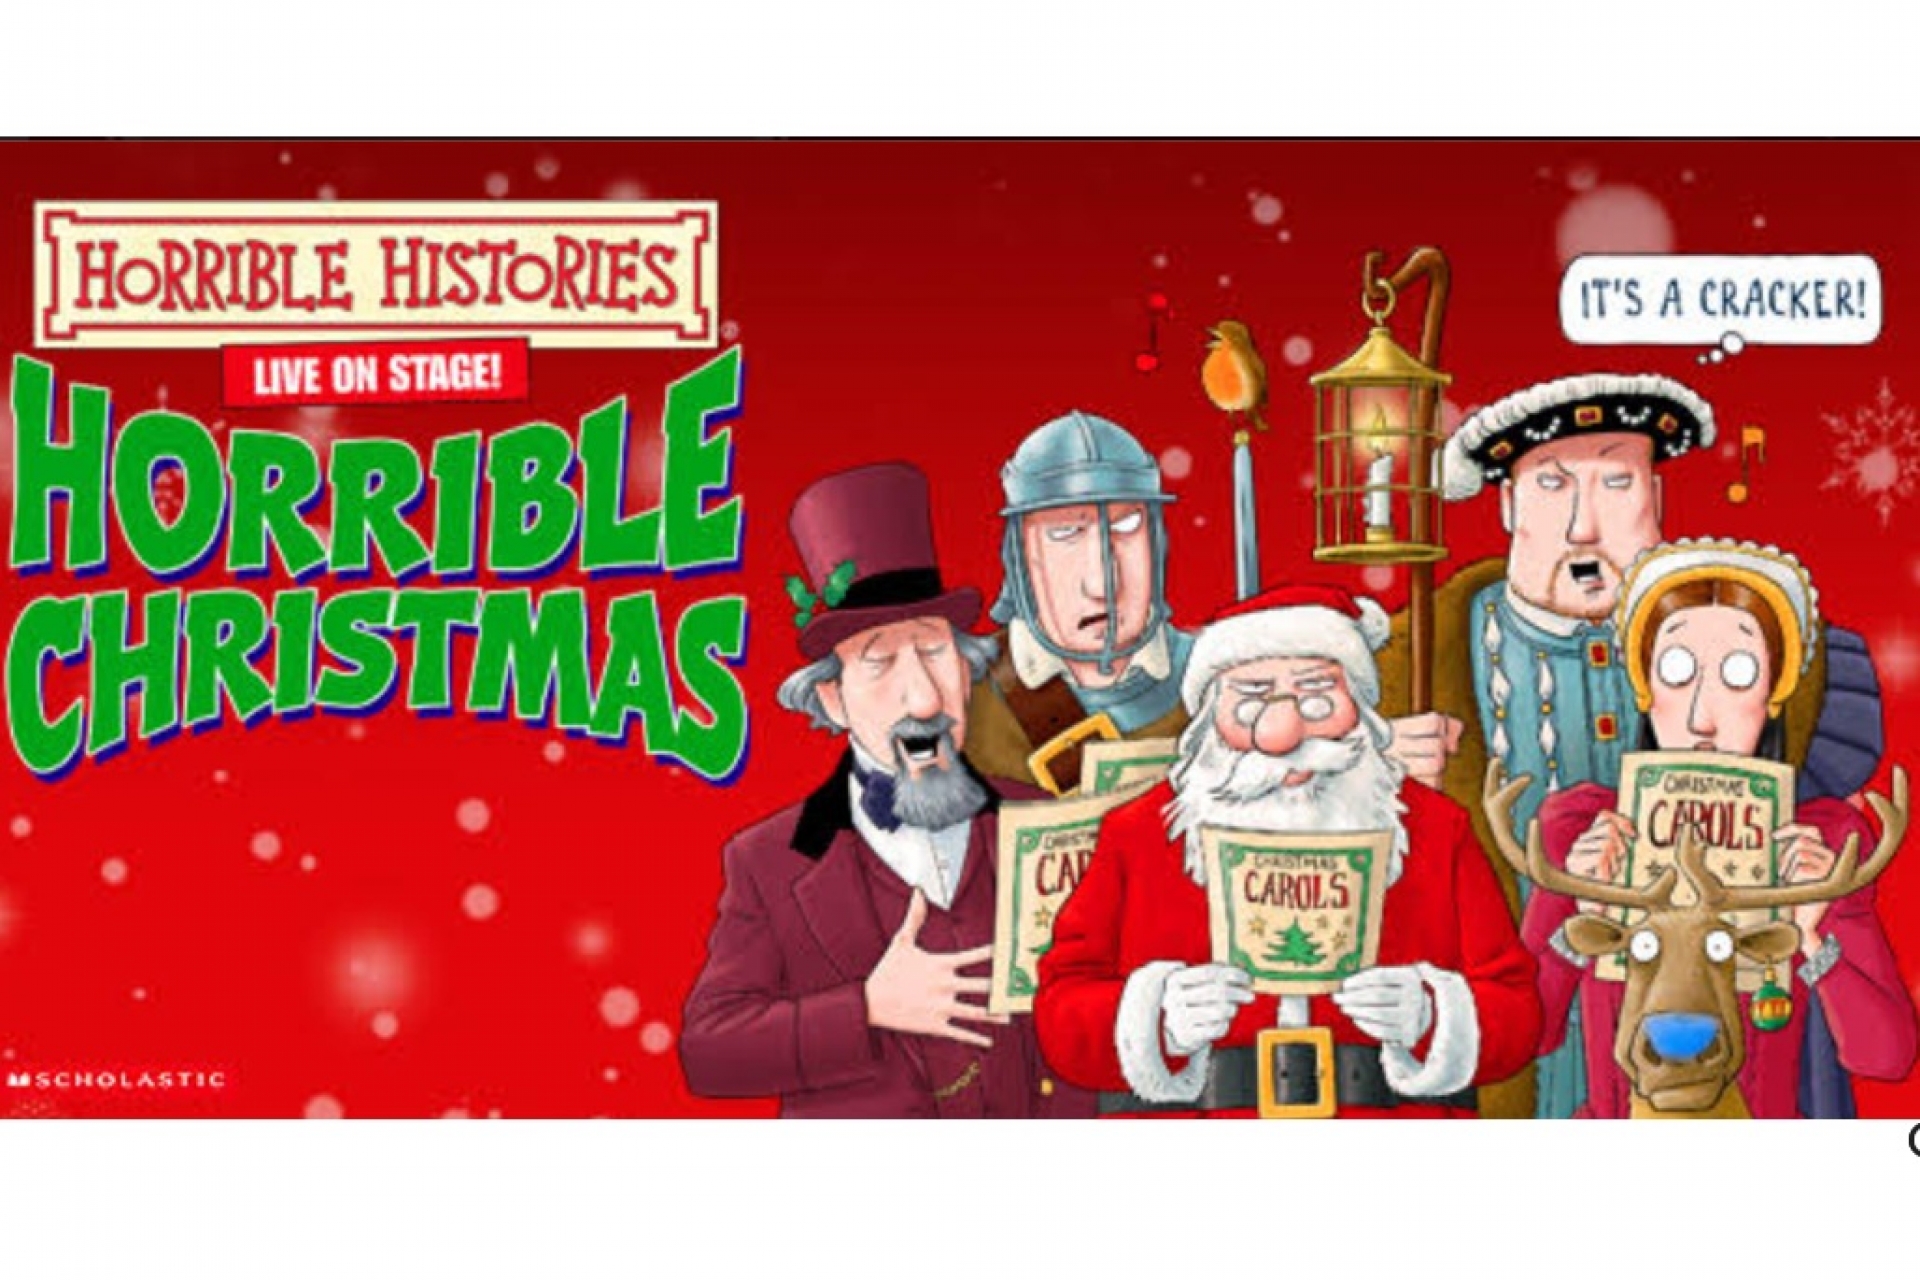 Win tickets! Family Fun at the Theatre This Christmas with Horrible Histories